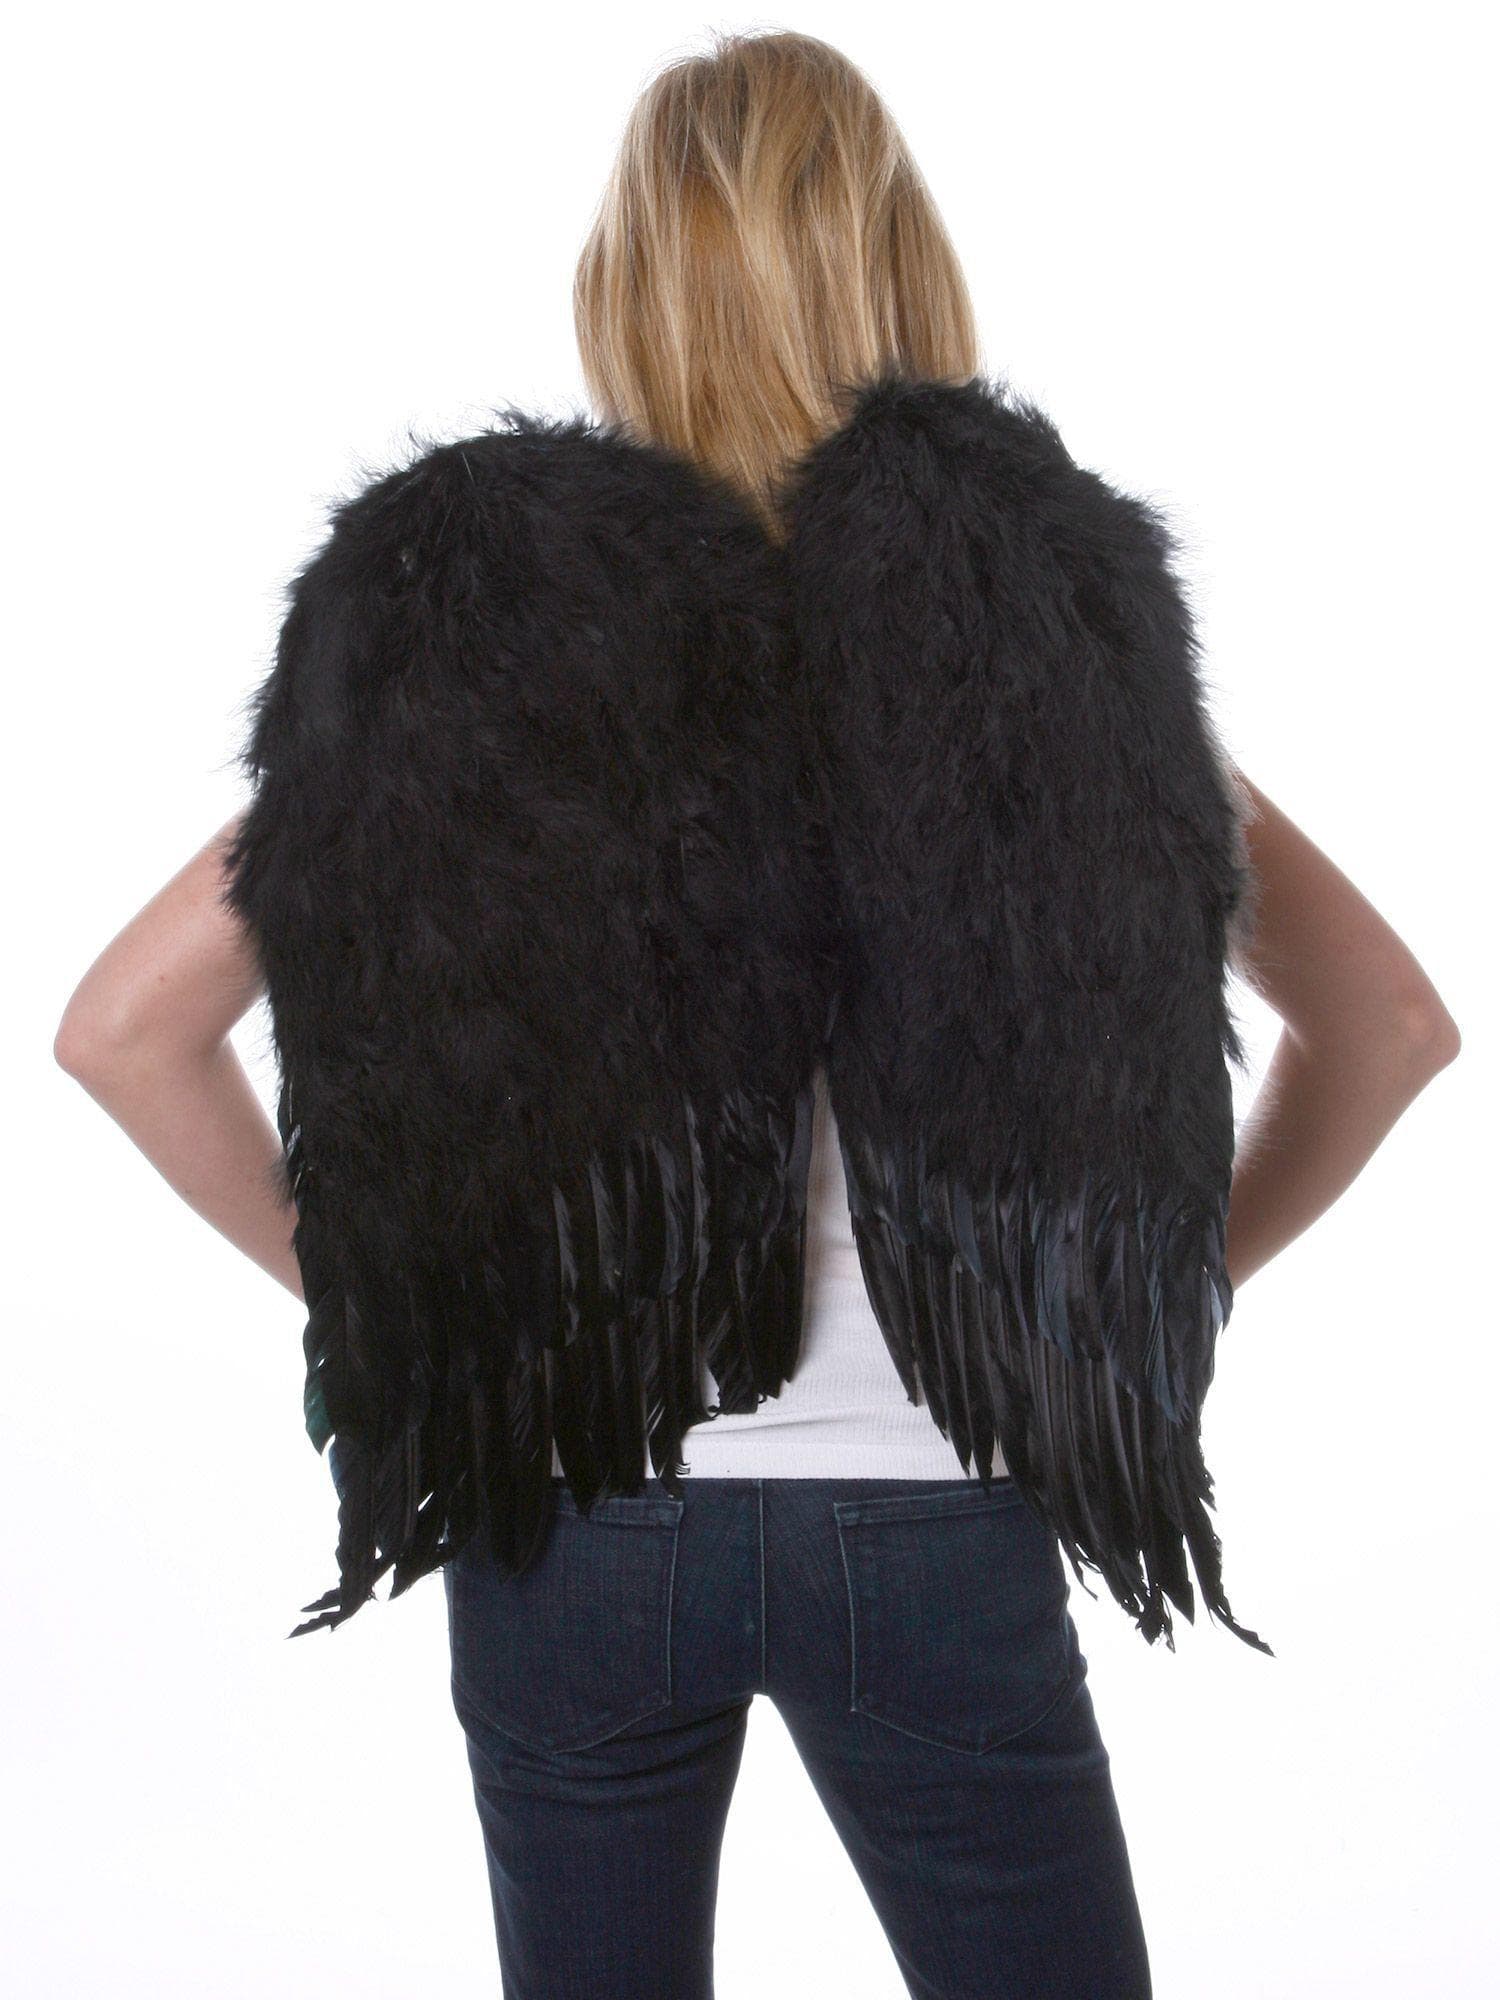 Black Feather Wings - costumes.com